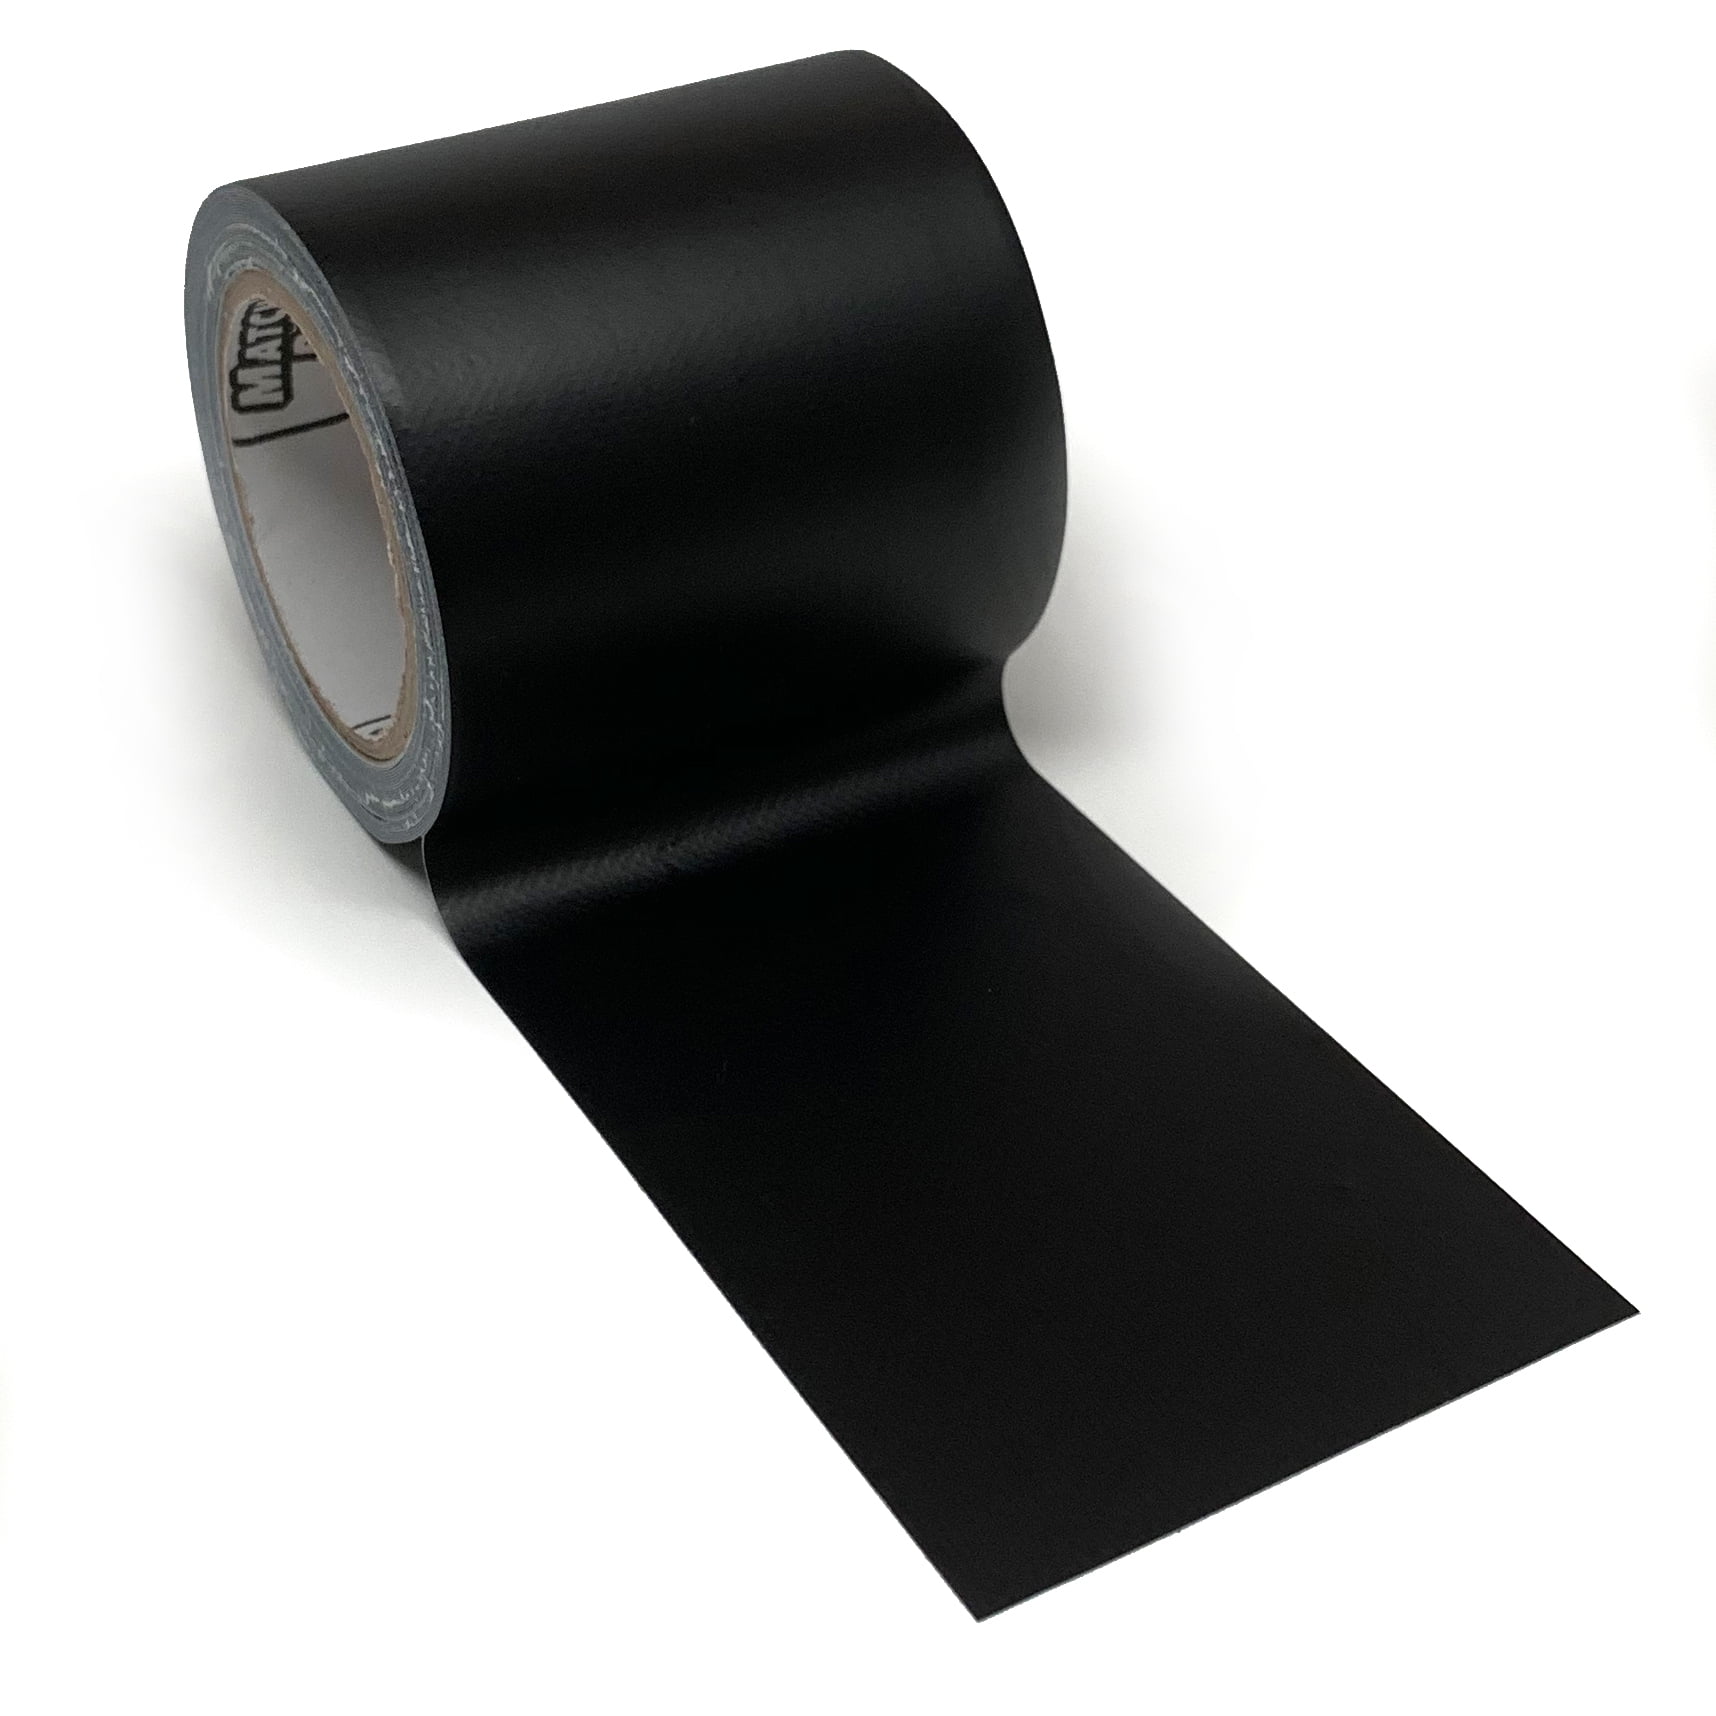 WANGYUXIN Self-Adhesive Leather Repair Tape,Leather Patches for